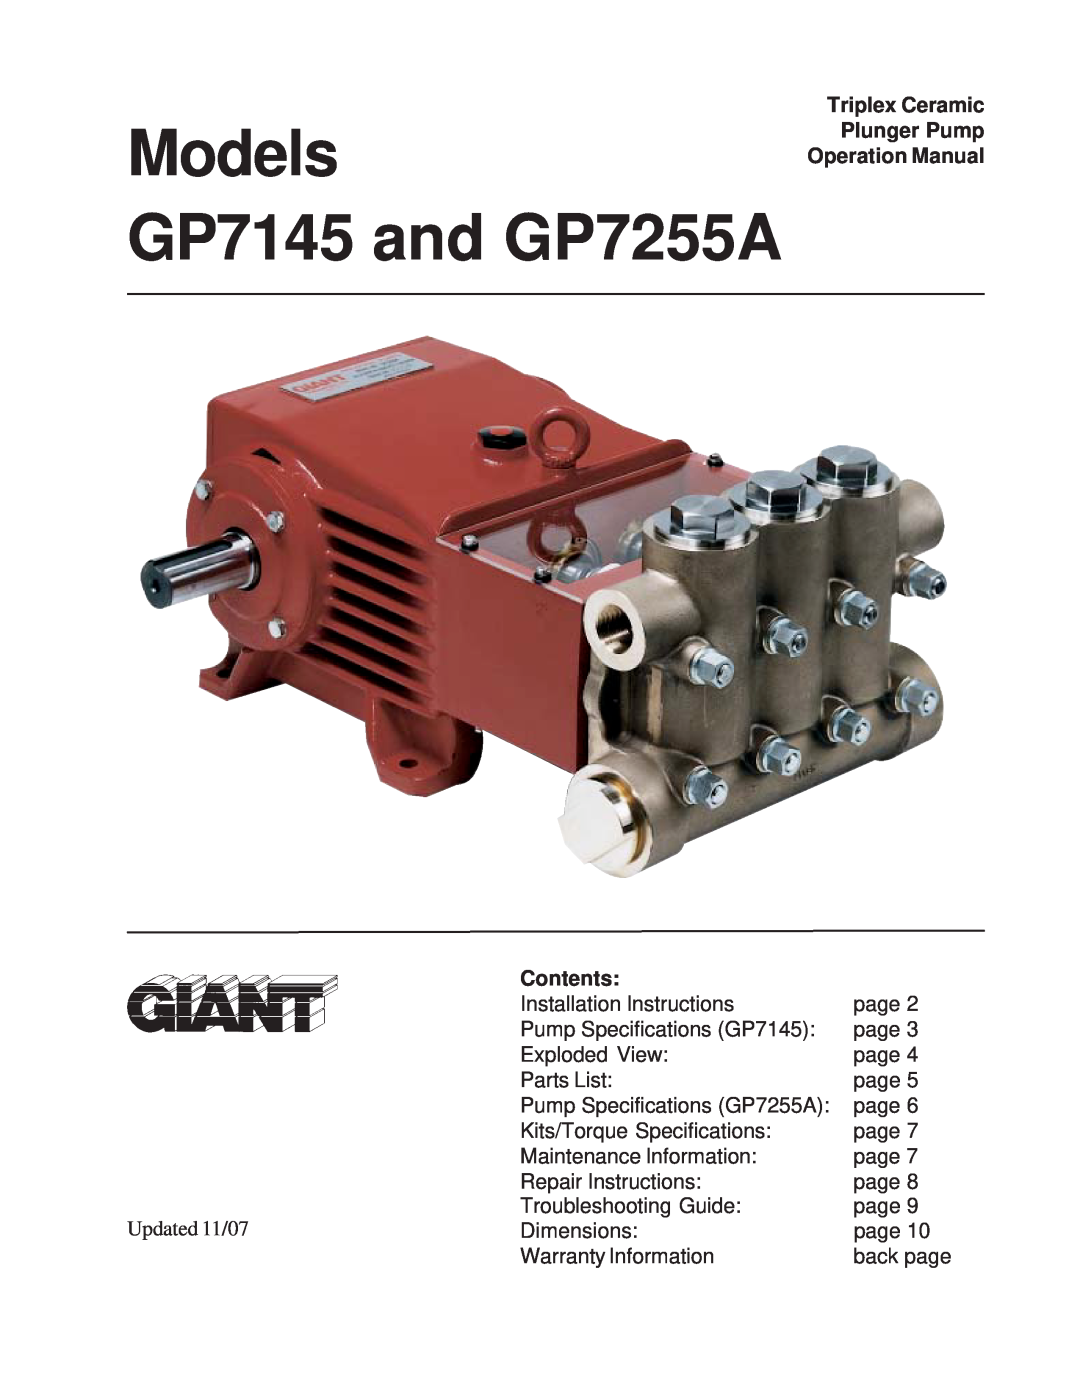 Giant installation instructions Contents, Models GP7145 and GP7255A 